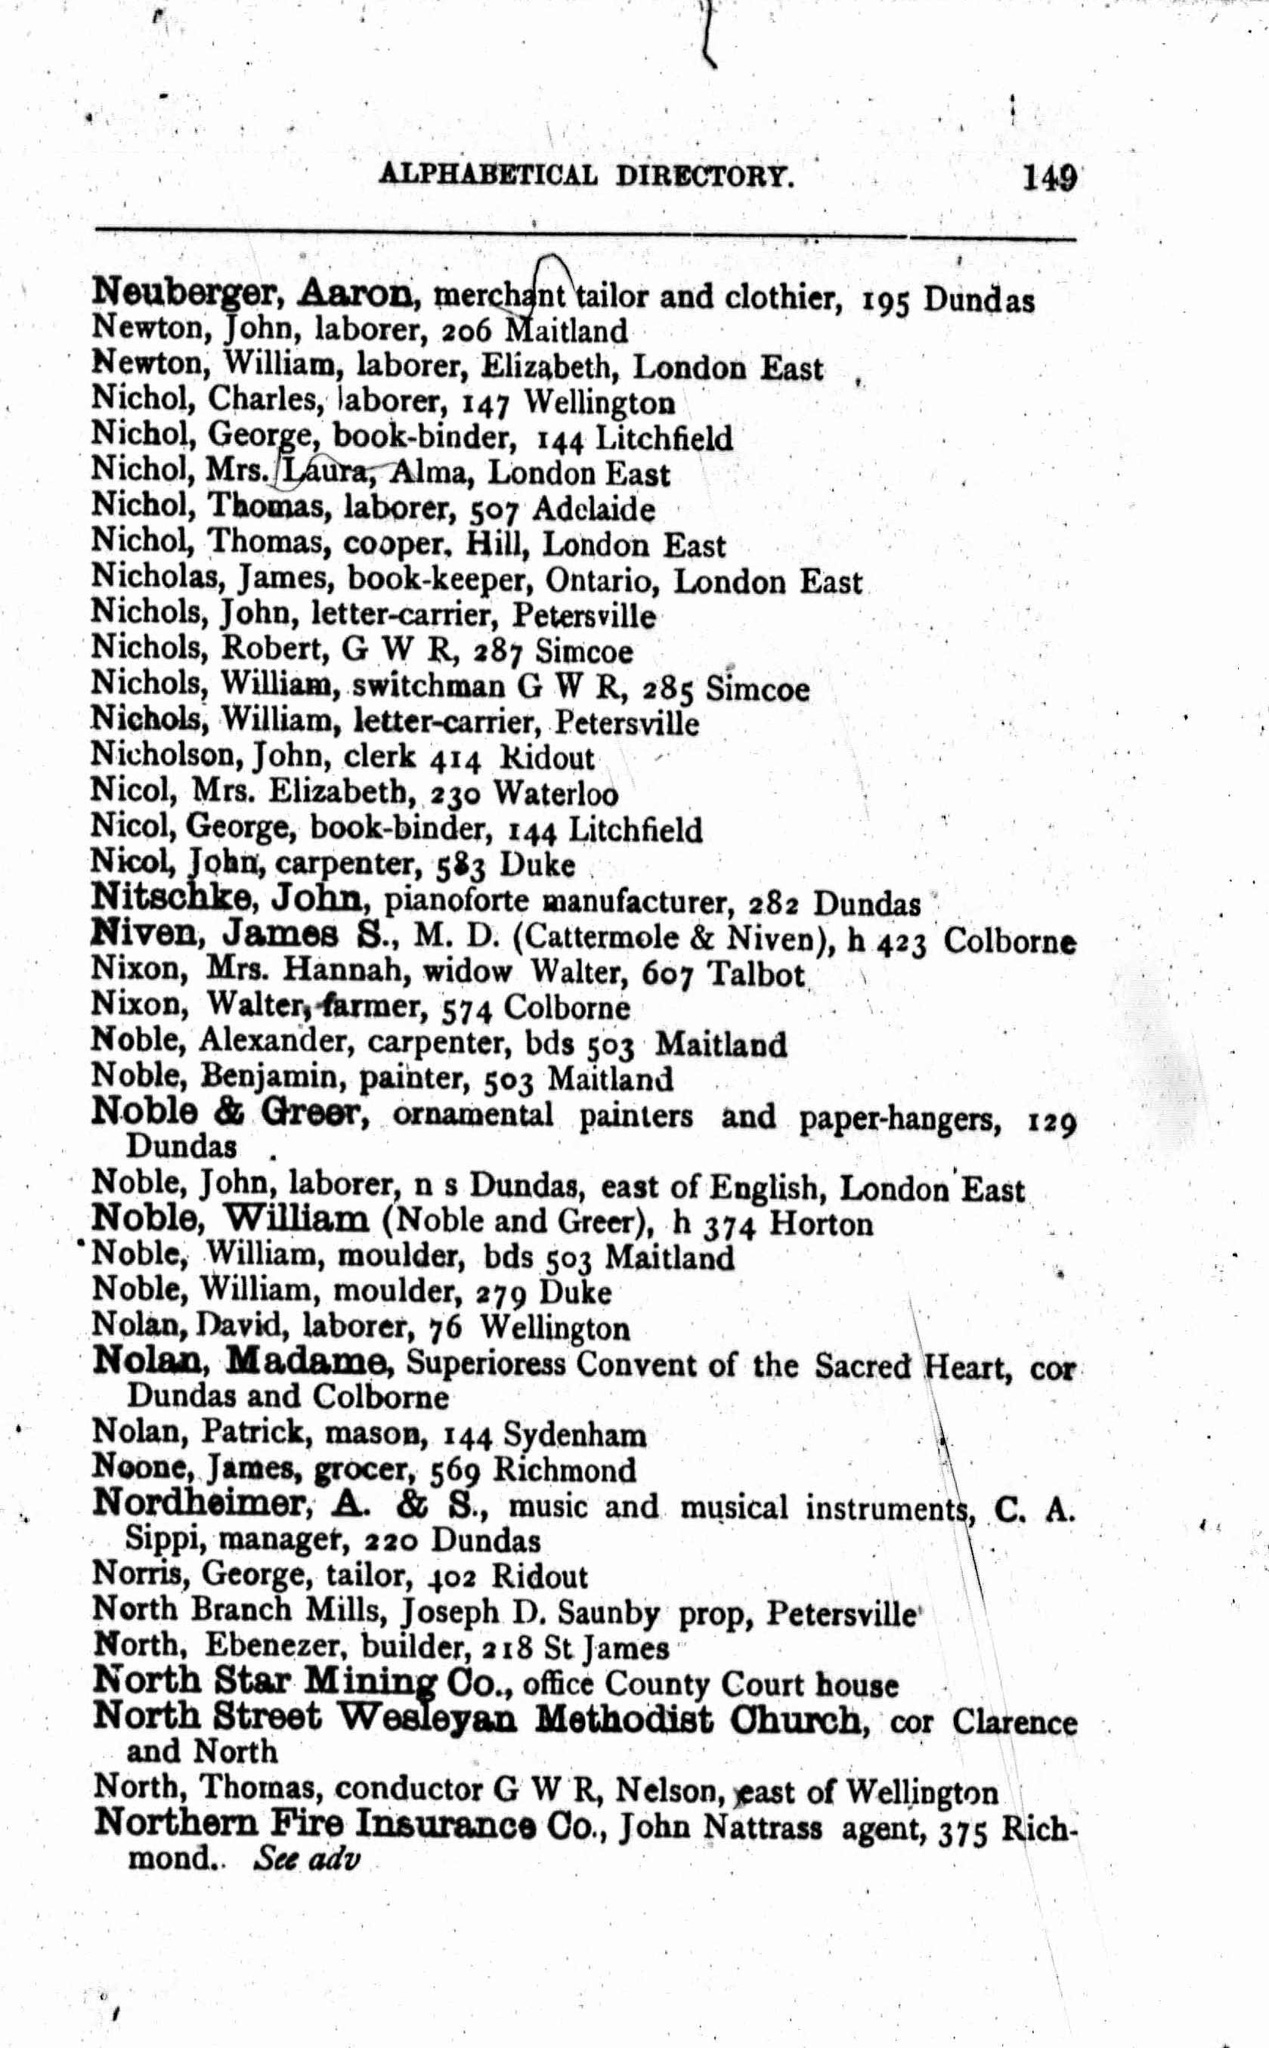 1877 London Ont City Directory for Nichol